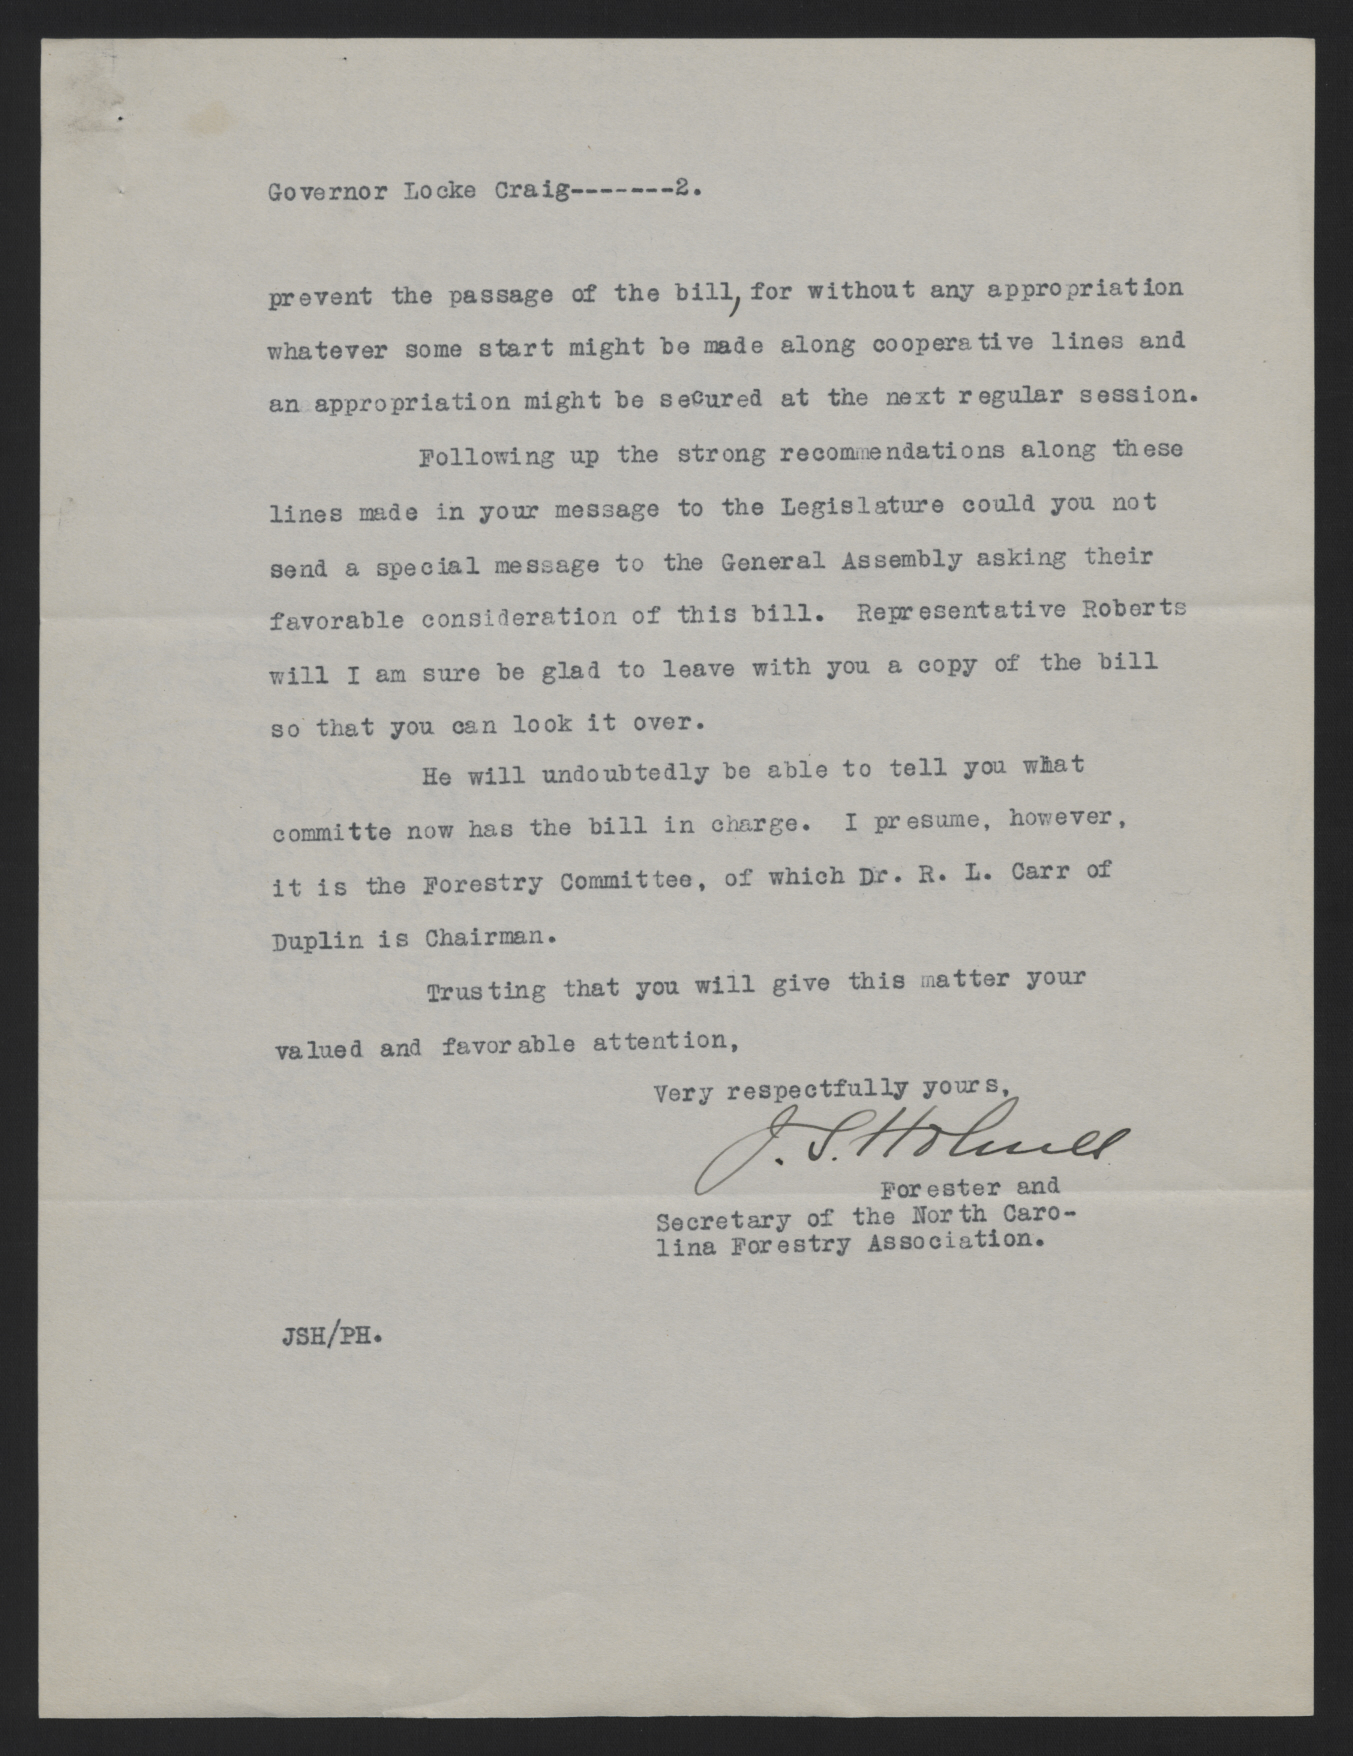 Letter from Holmes to Craig, January 25, 1915, page 2